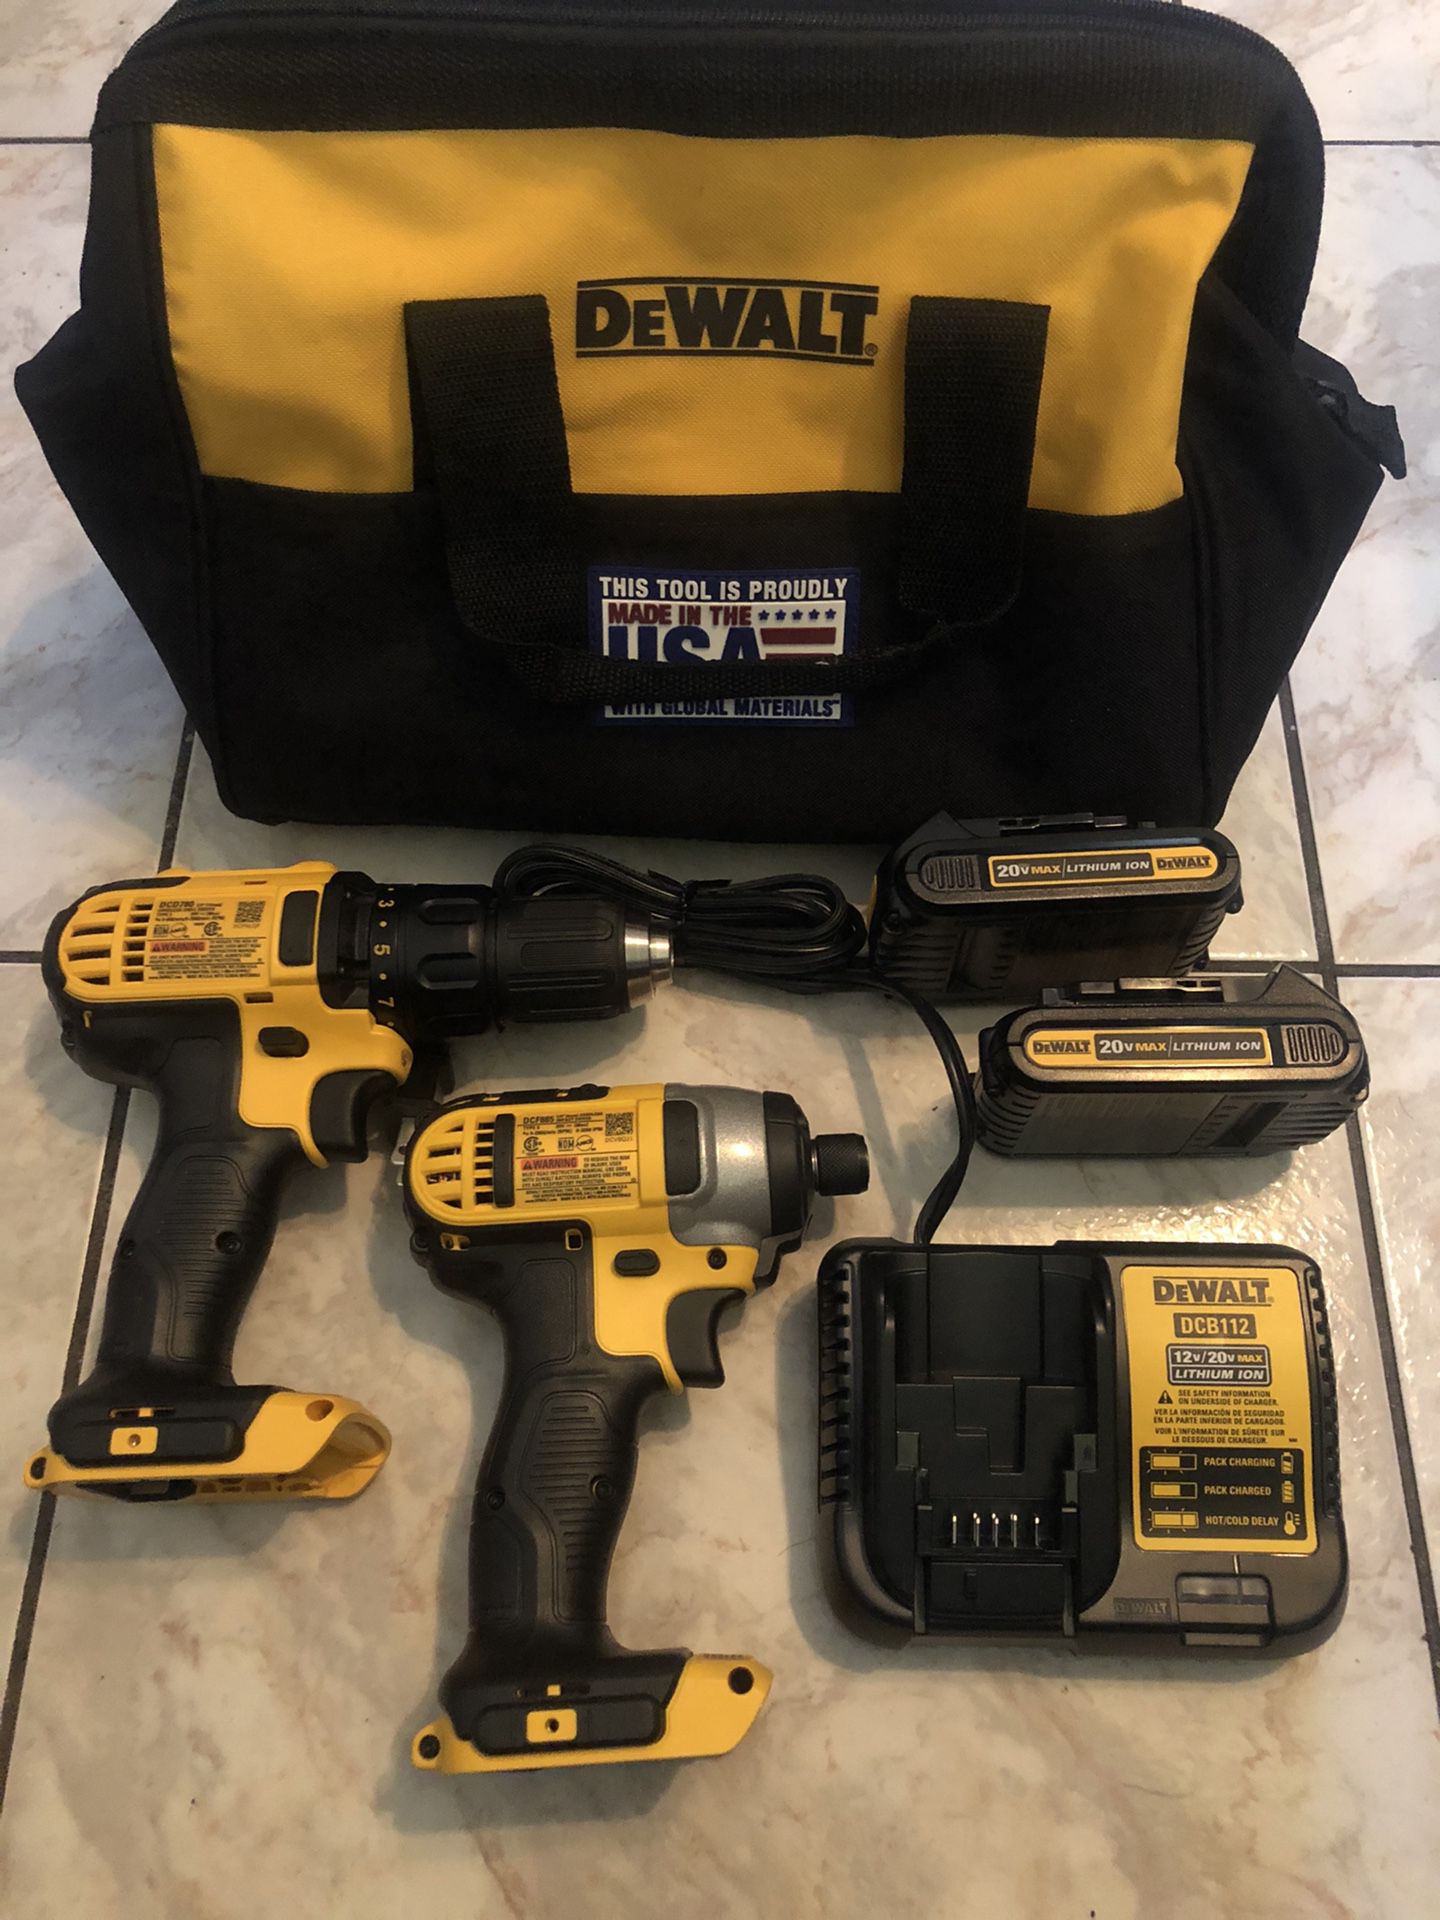 1 New DEWALT 20-Volt MAX Lithium-Ion Cordless Drill/Impact Combo Kit (2-Tool) with (2) Batteries 1.5Ah, Charger and Tool Bag $220 part numberDCF780 a